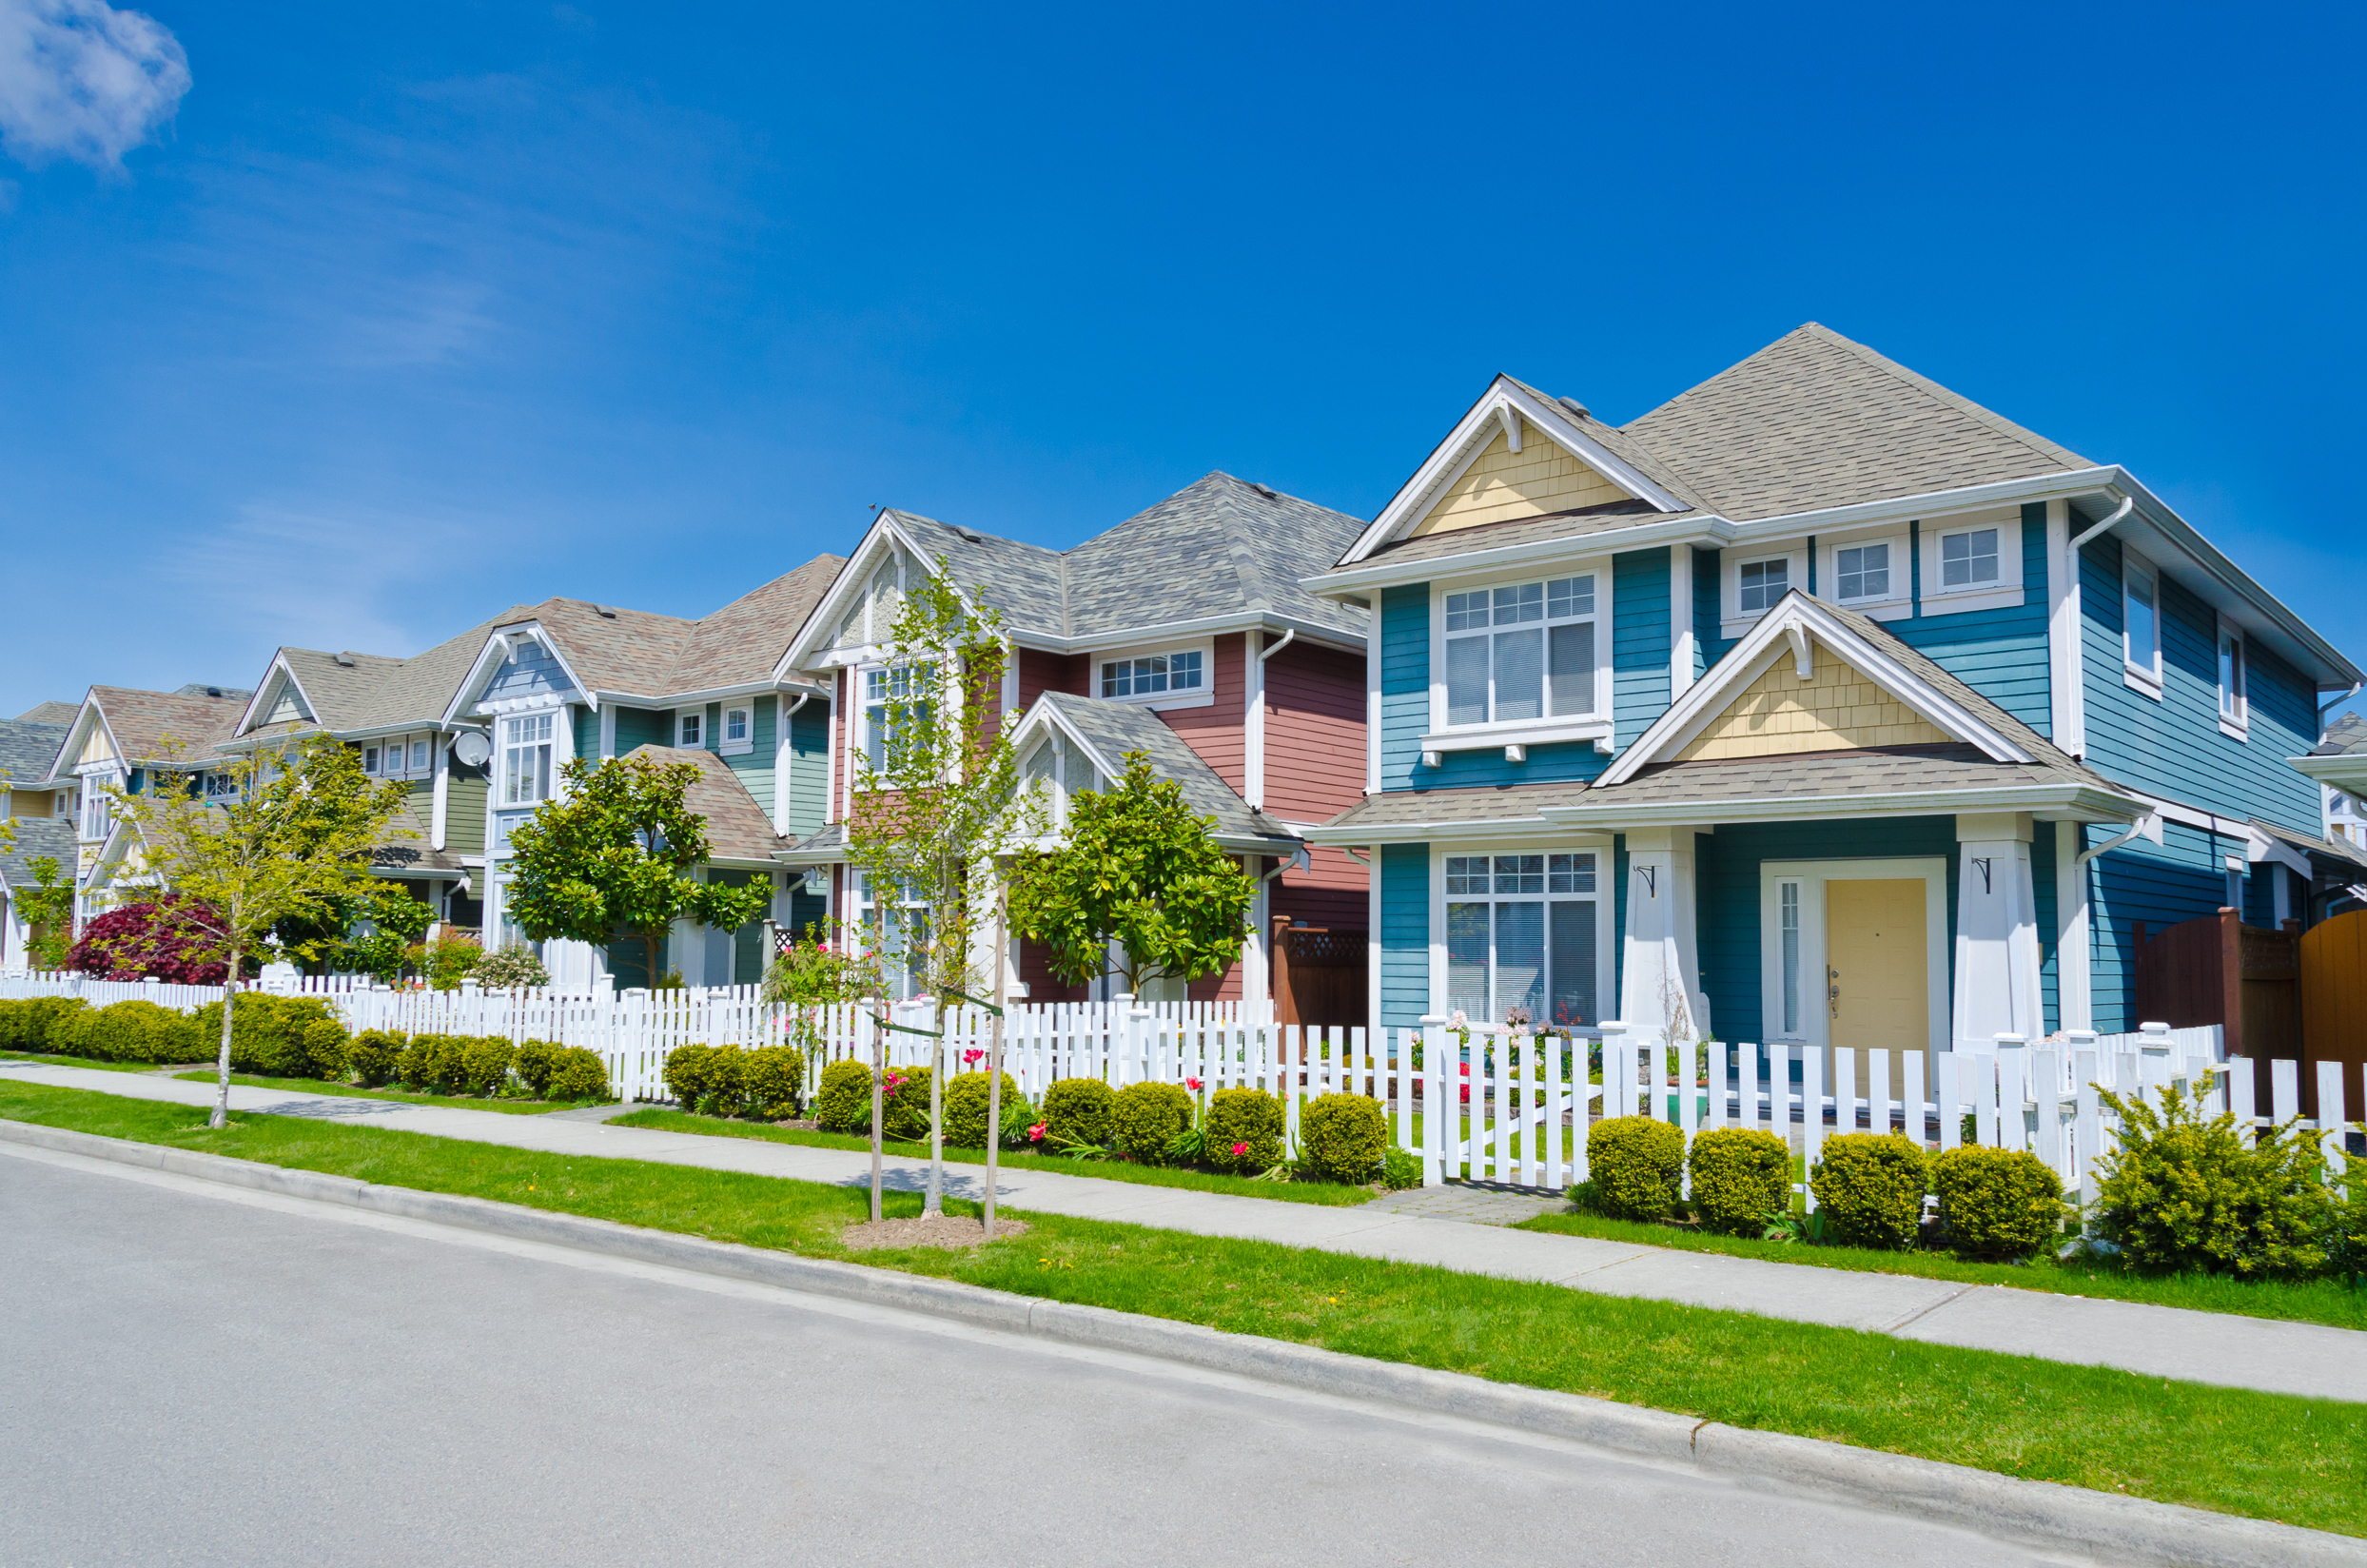 Townhomes & Patio Homes Management